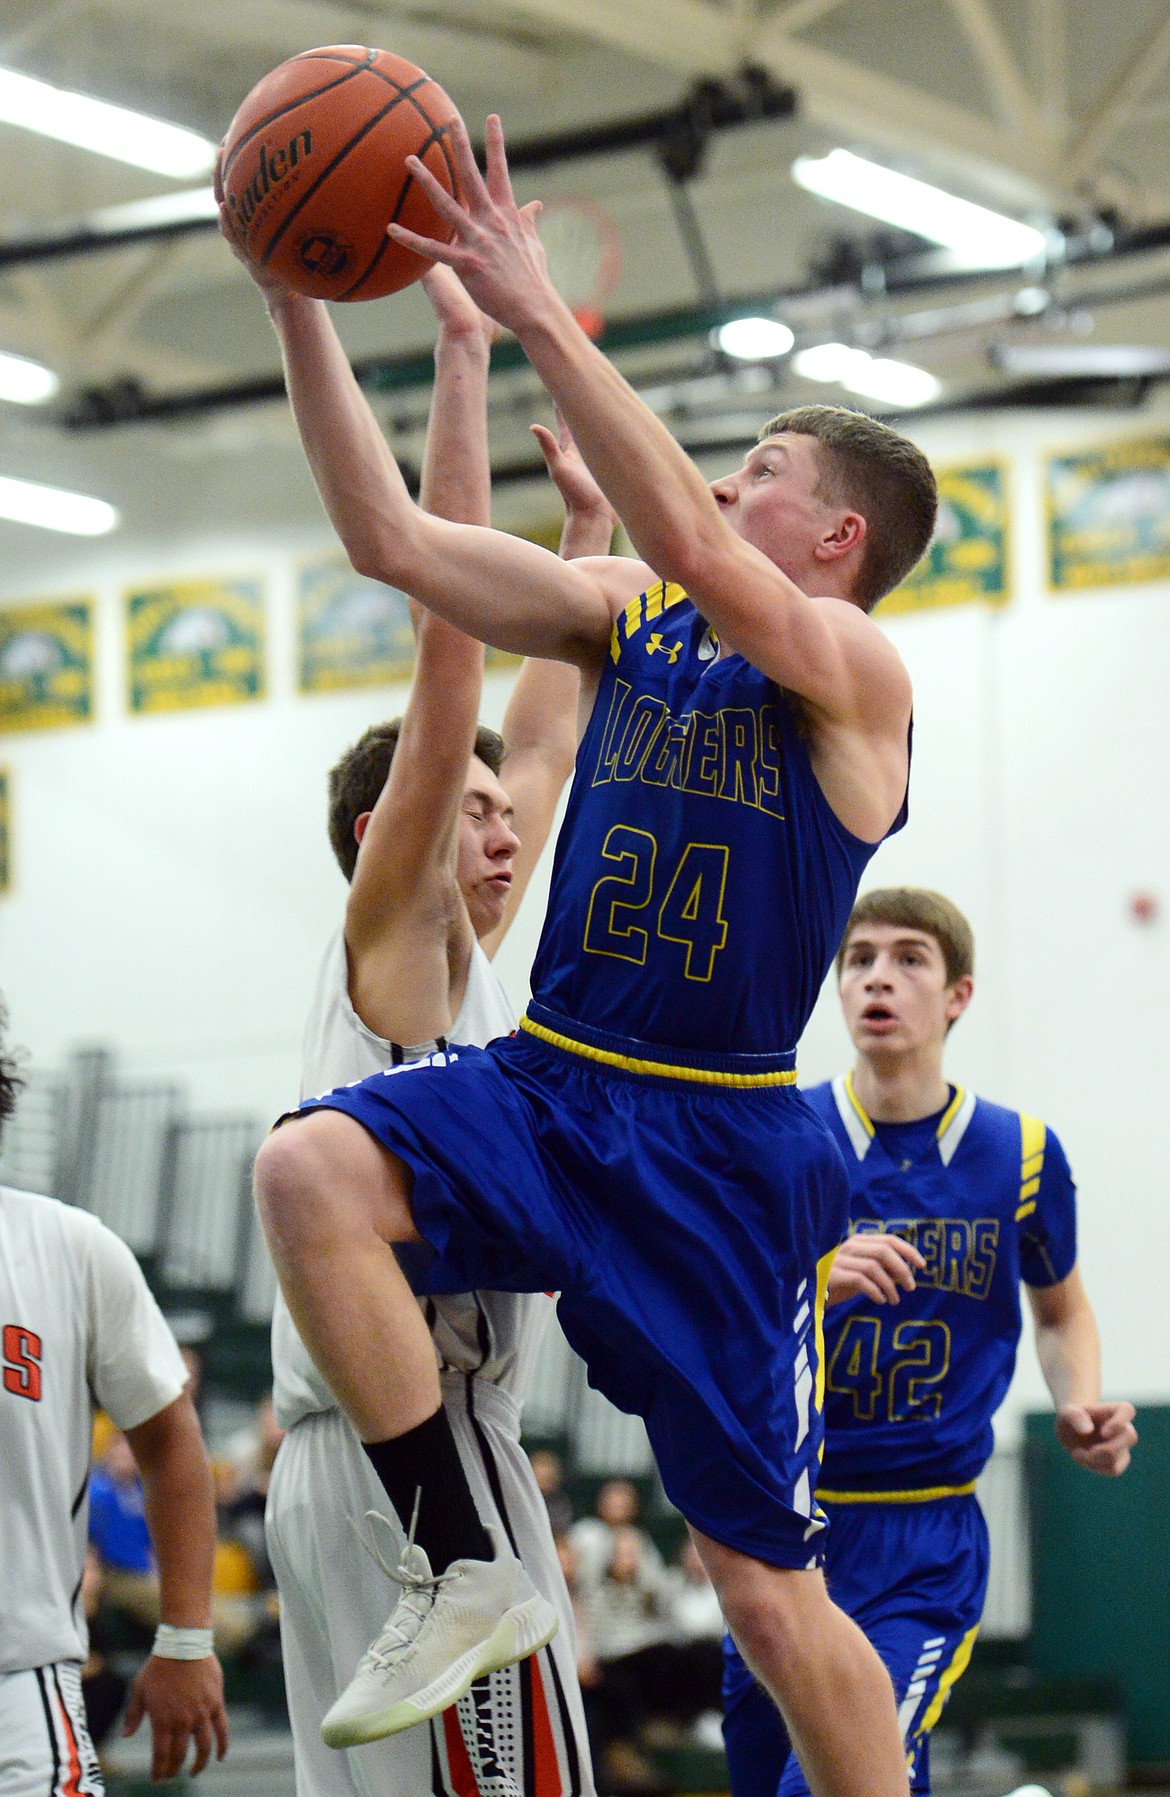 Libby's Jay Beagle (24) drives to the hoop against Ronan at Whitefish High School on Thursday. (Casey Kreider/Daily Inter Lake)